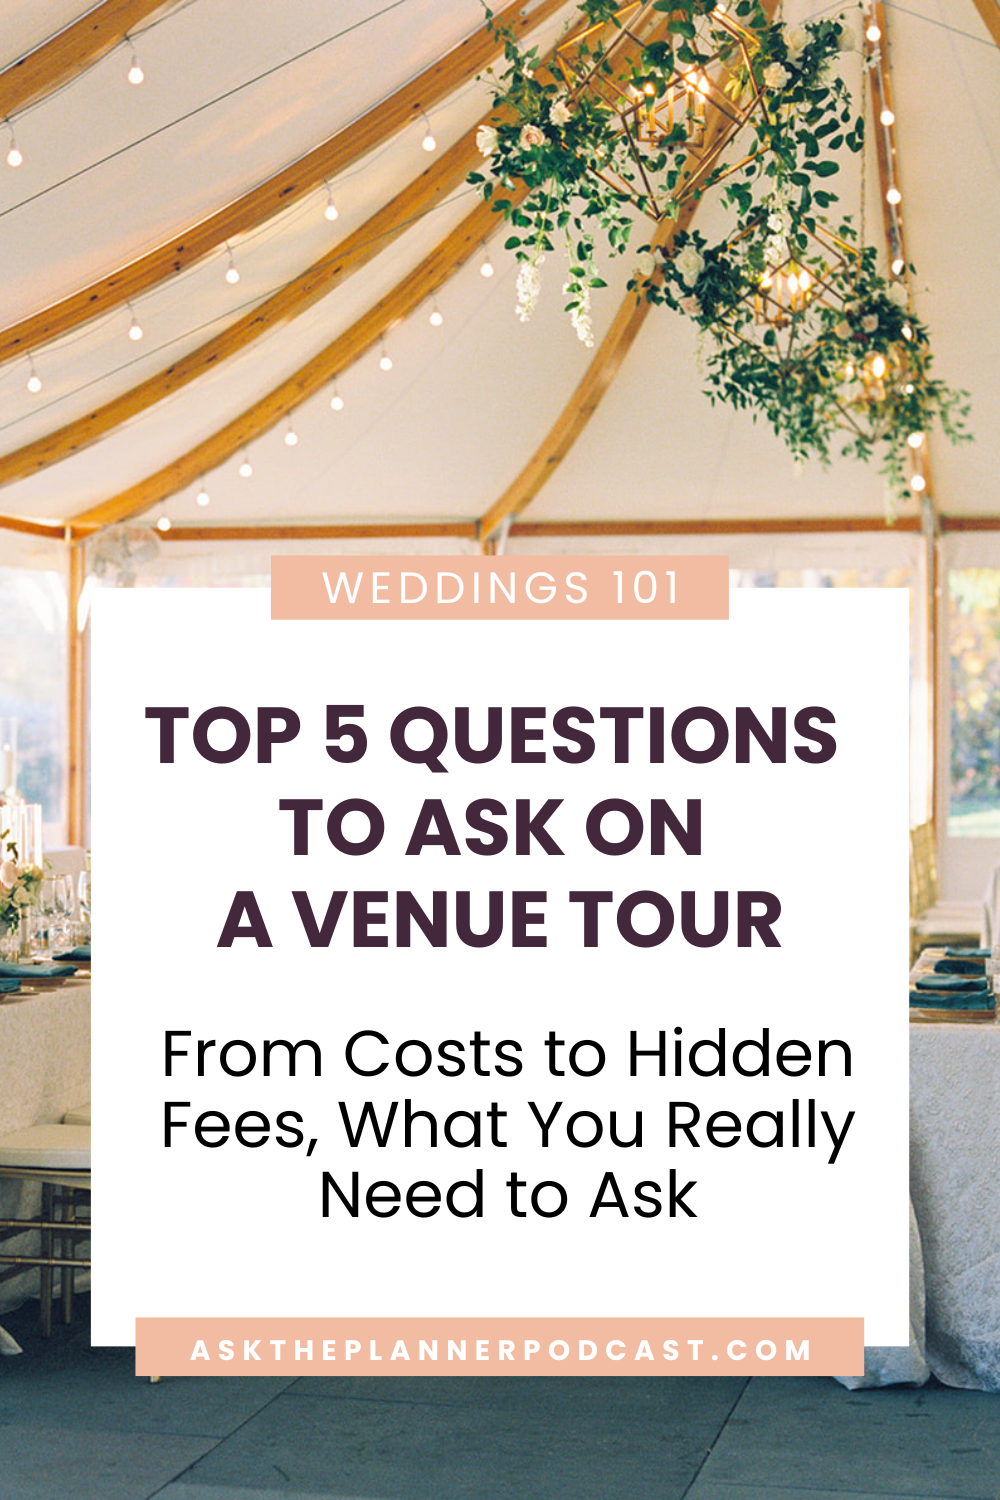 Top 5 Questions to 
Ask on a Venue Tour